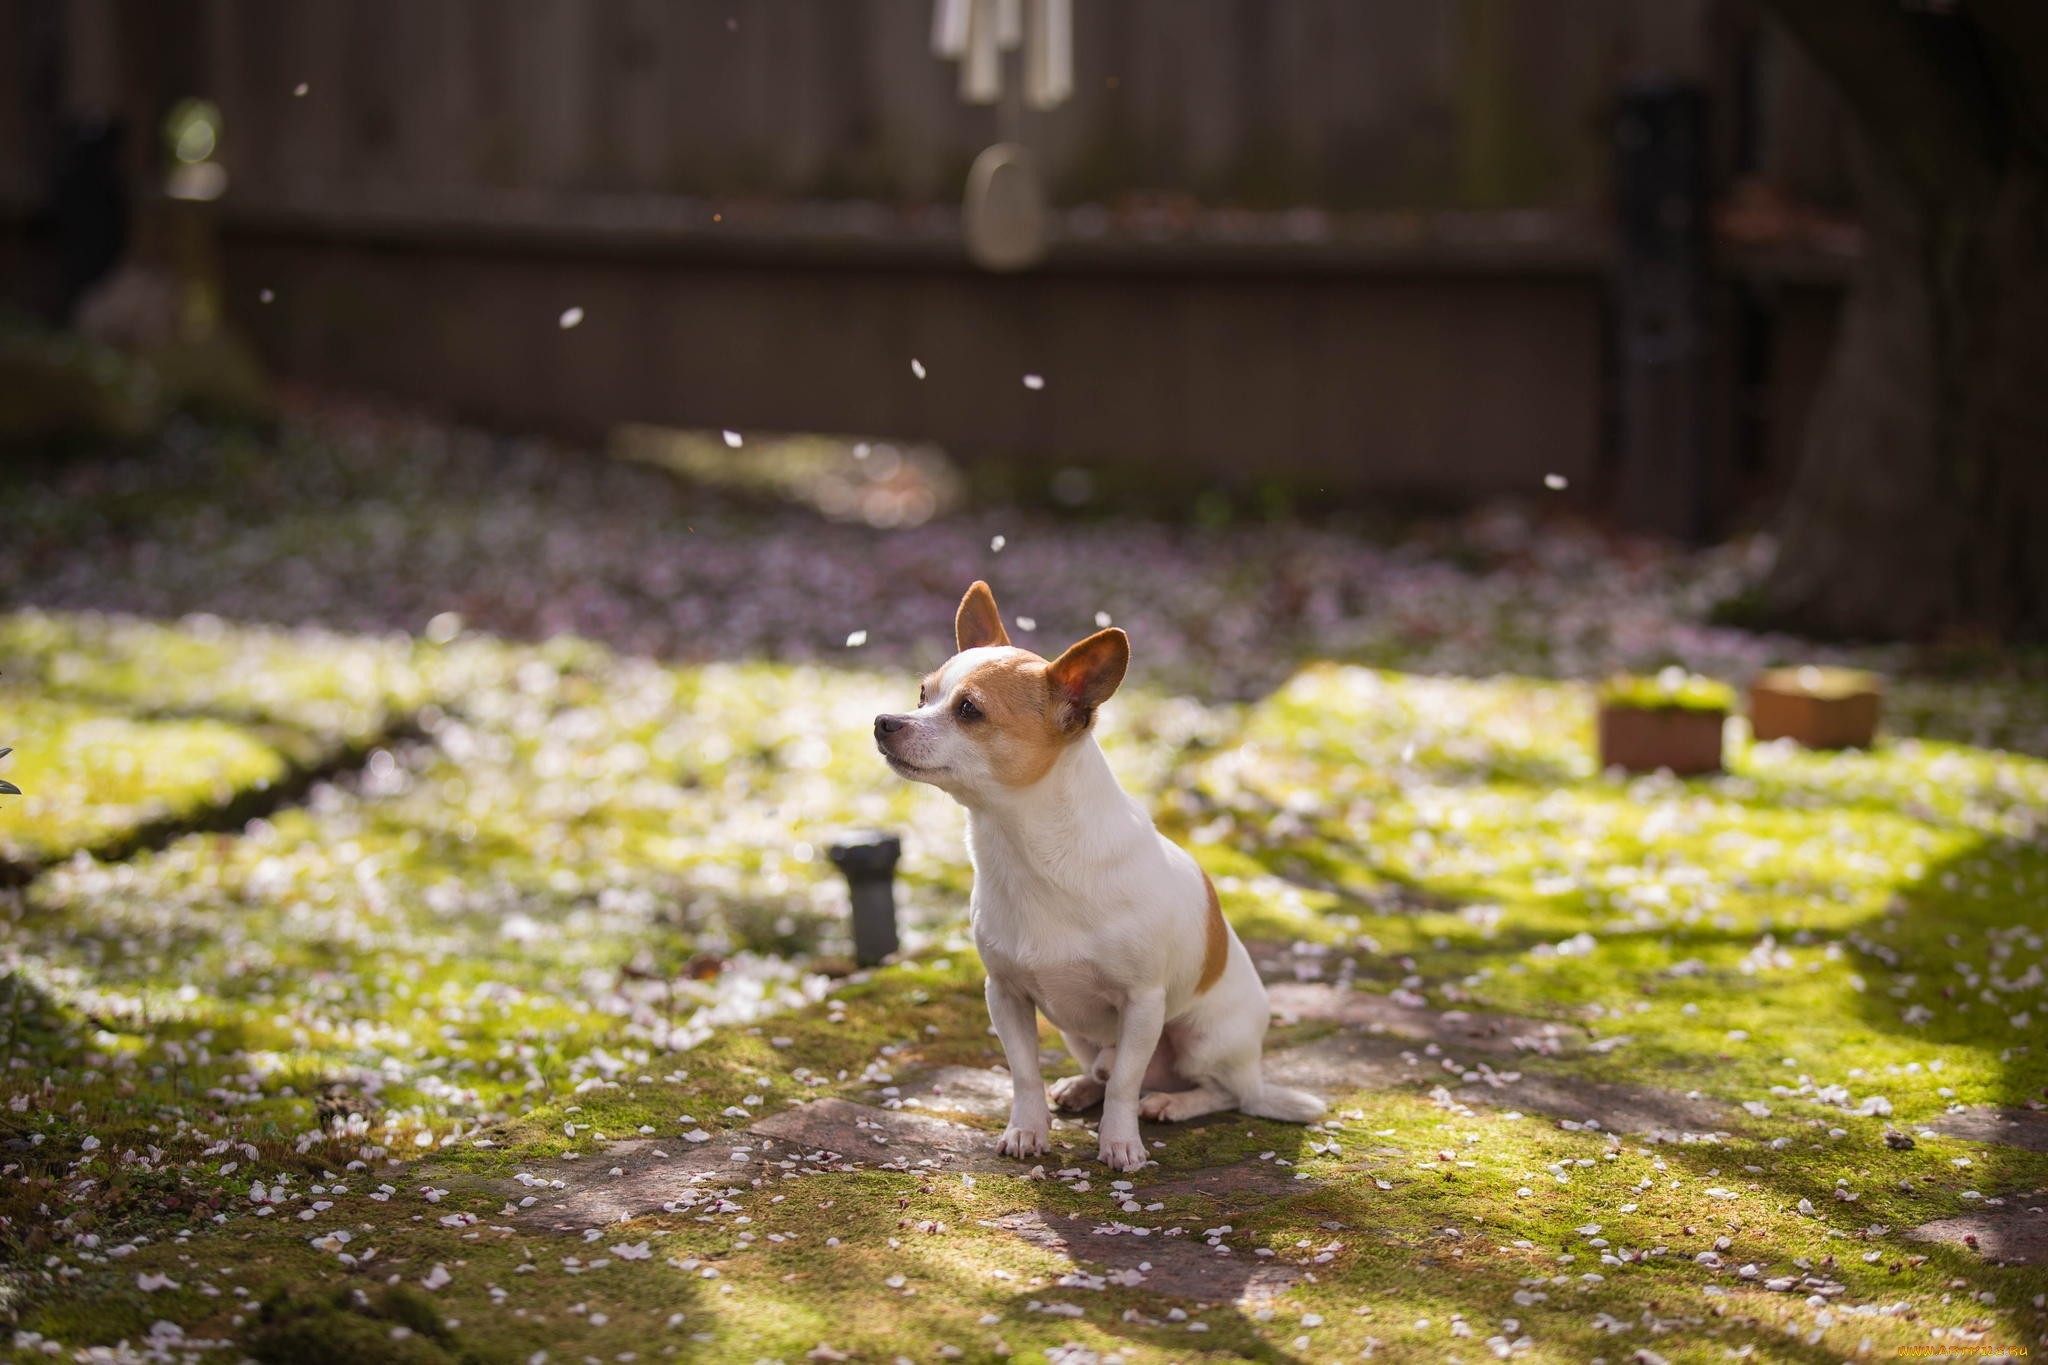 General 2048x1365 animals dog Jack Russell Terrier depth of field petals chihuahua mammals outdoors sitting